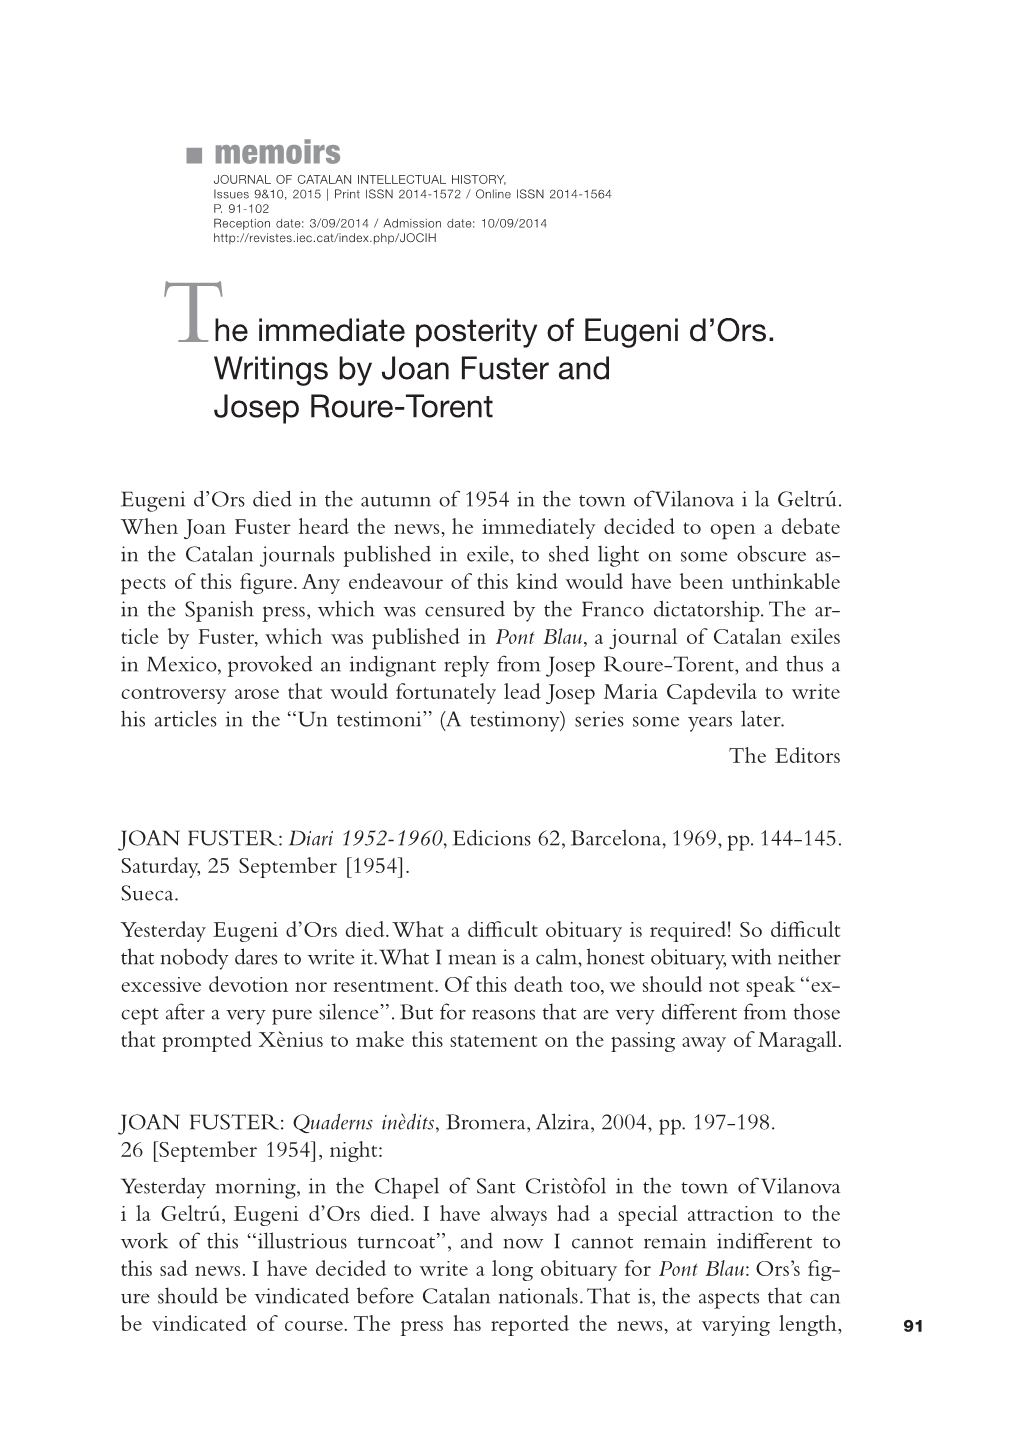 Memoirs JOURNAL of CATALAN INTELLECTUAL HISTORY, Issues 9&10, 2015 | Print ISSN 2014-1572 / Online ISSN 2014-1564 P